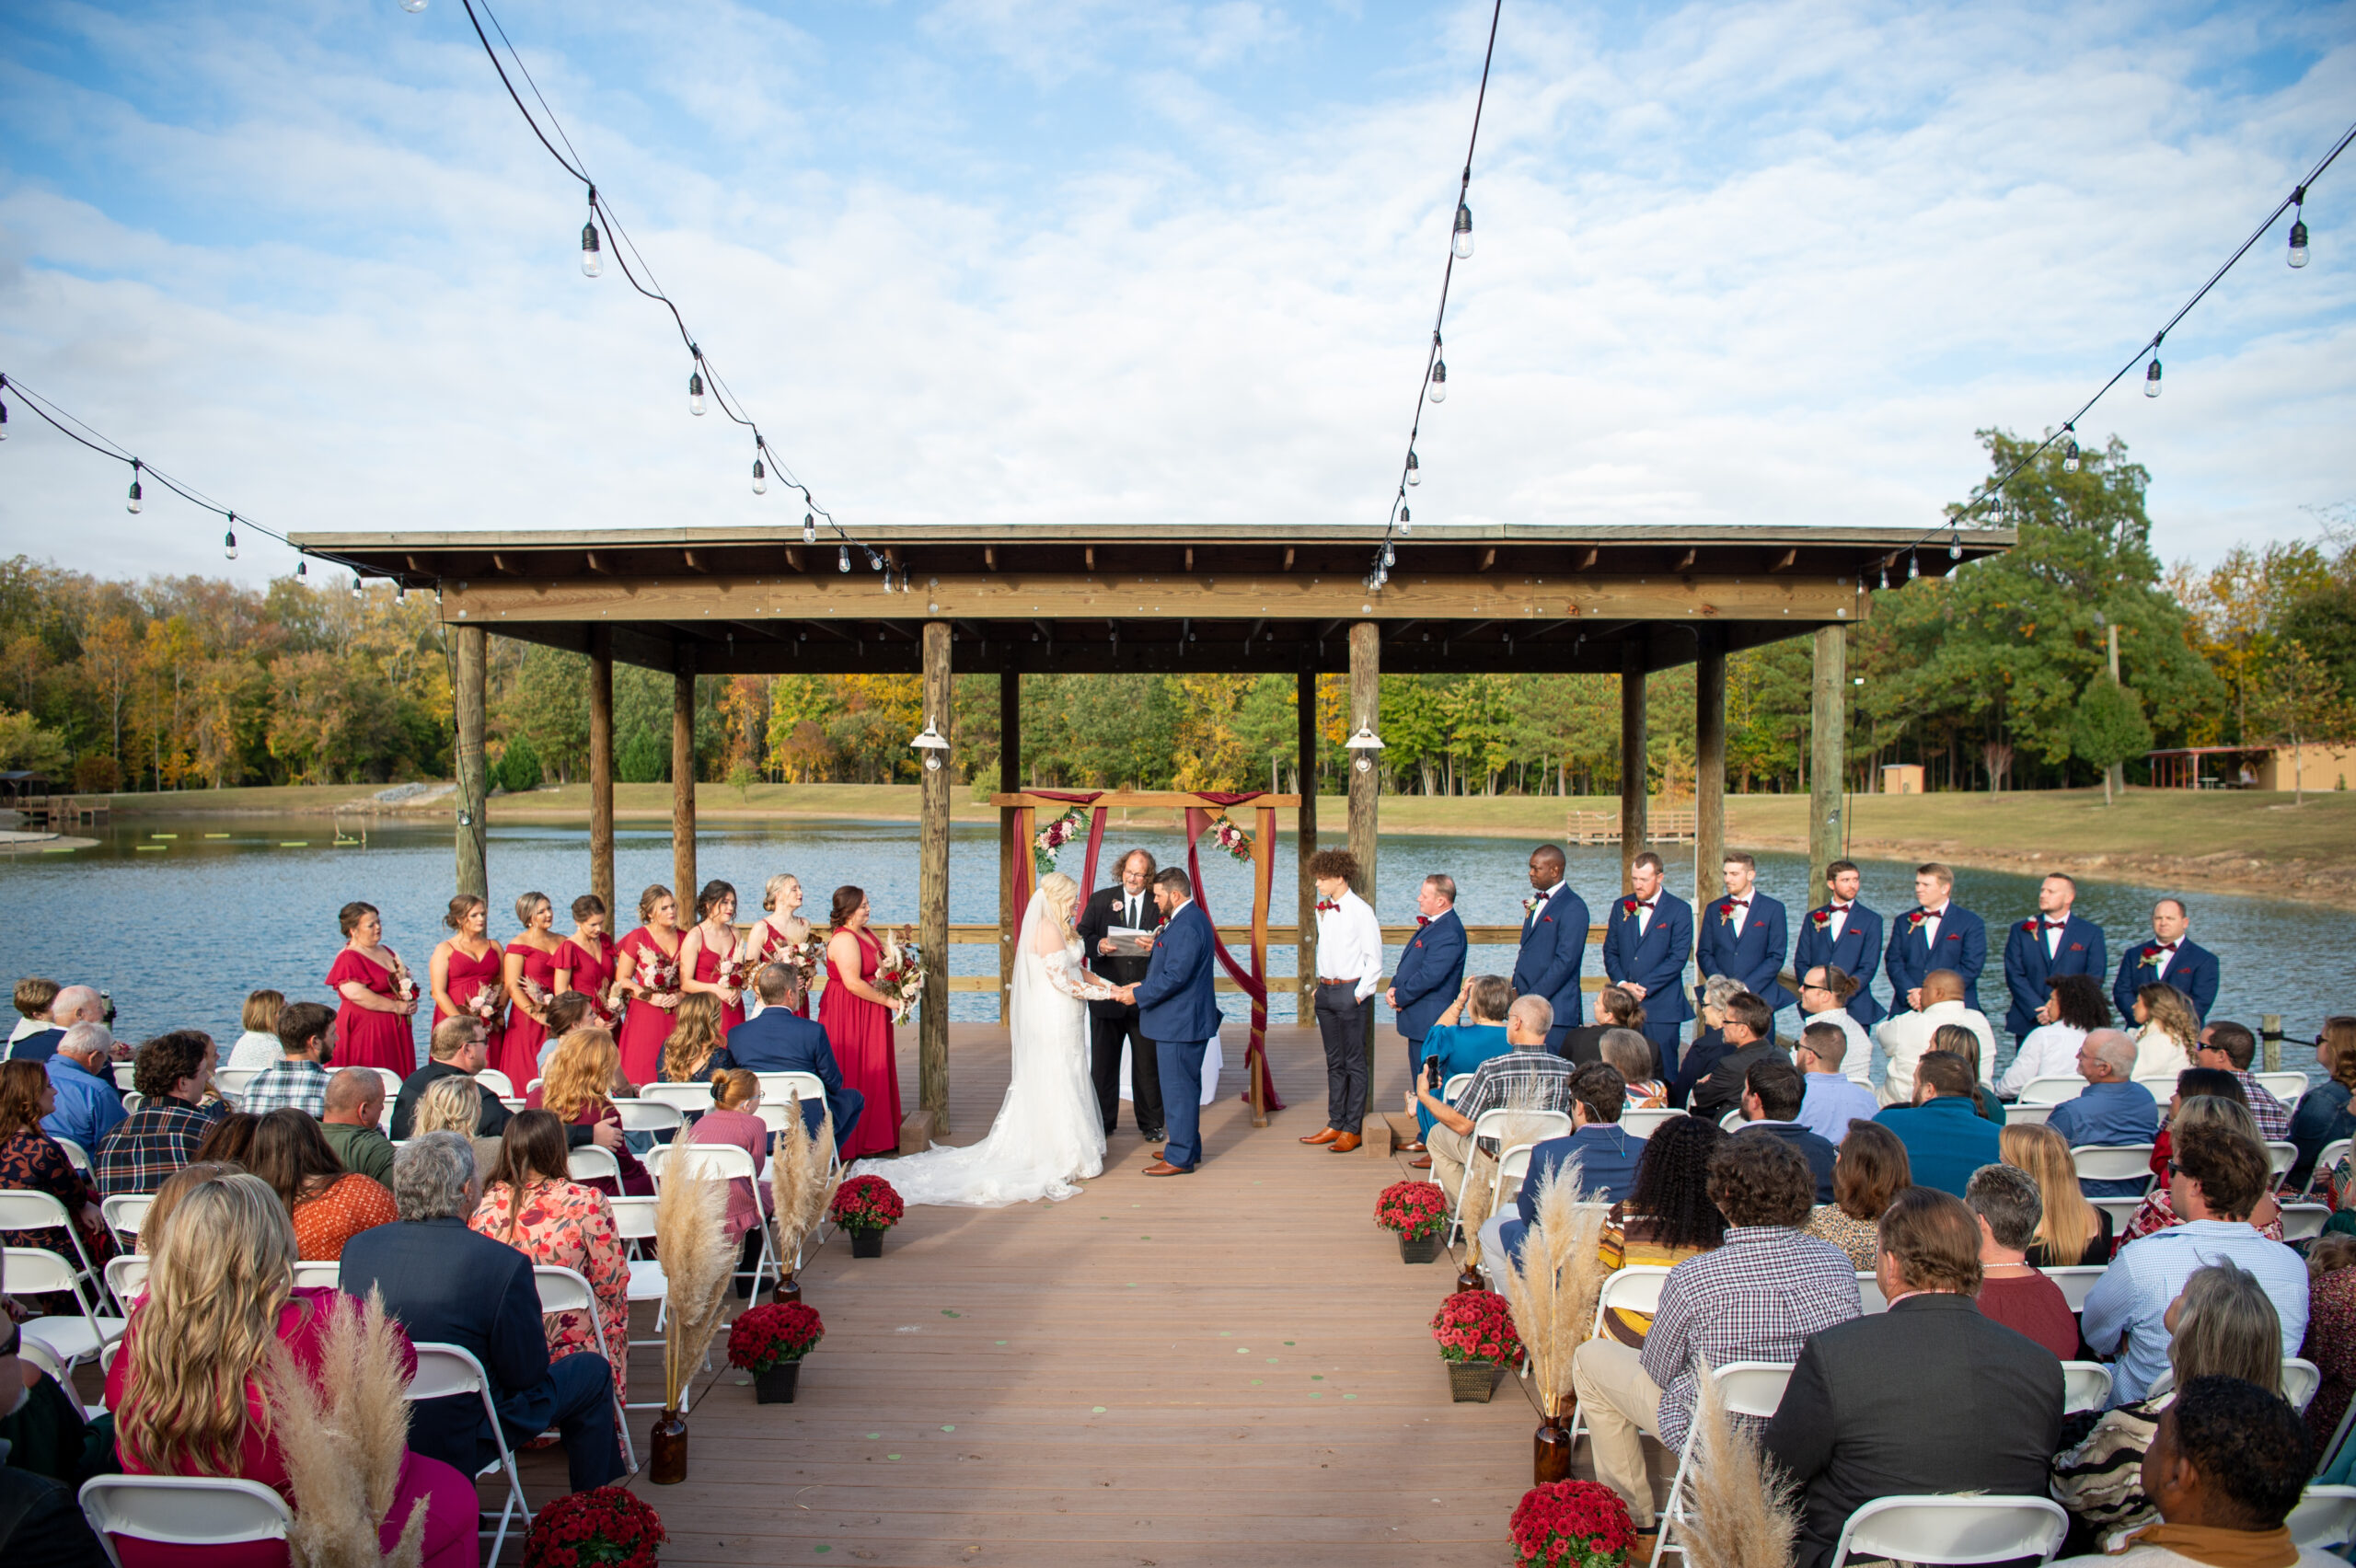 Couple getting married at The Crawfish Shack in Hertford, NC